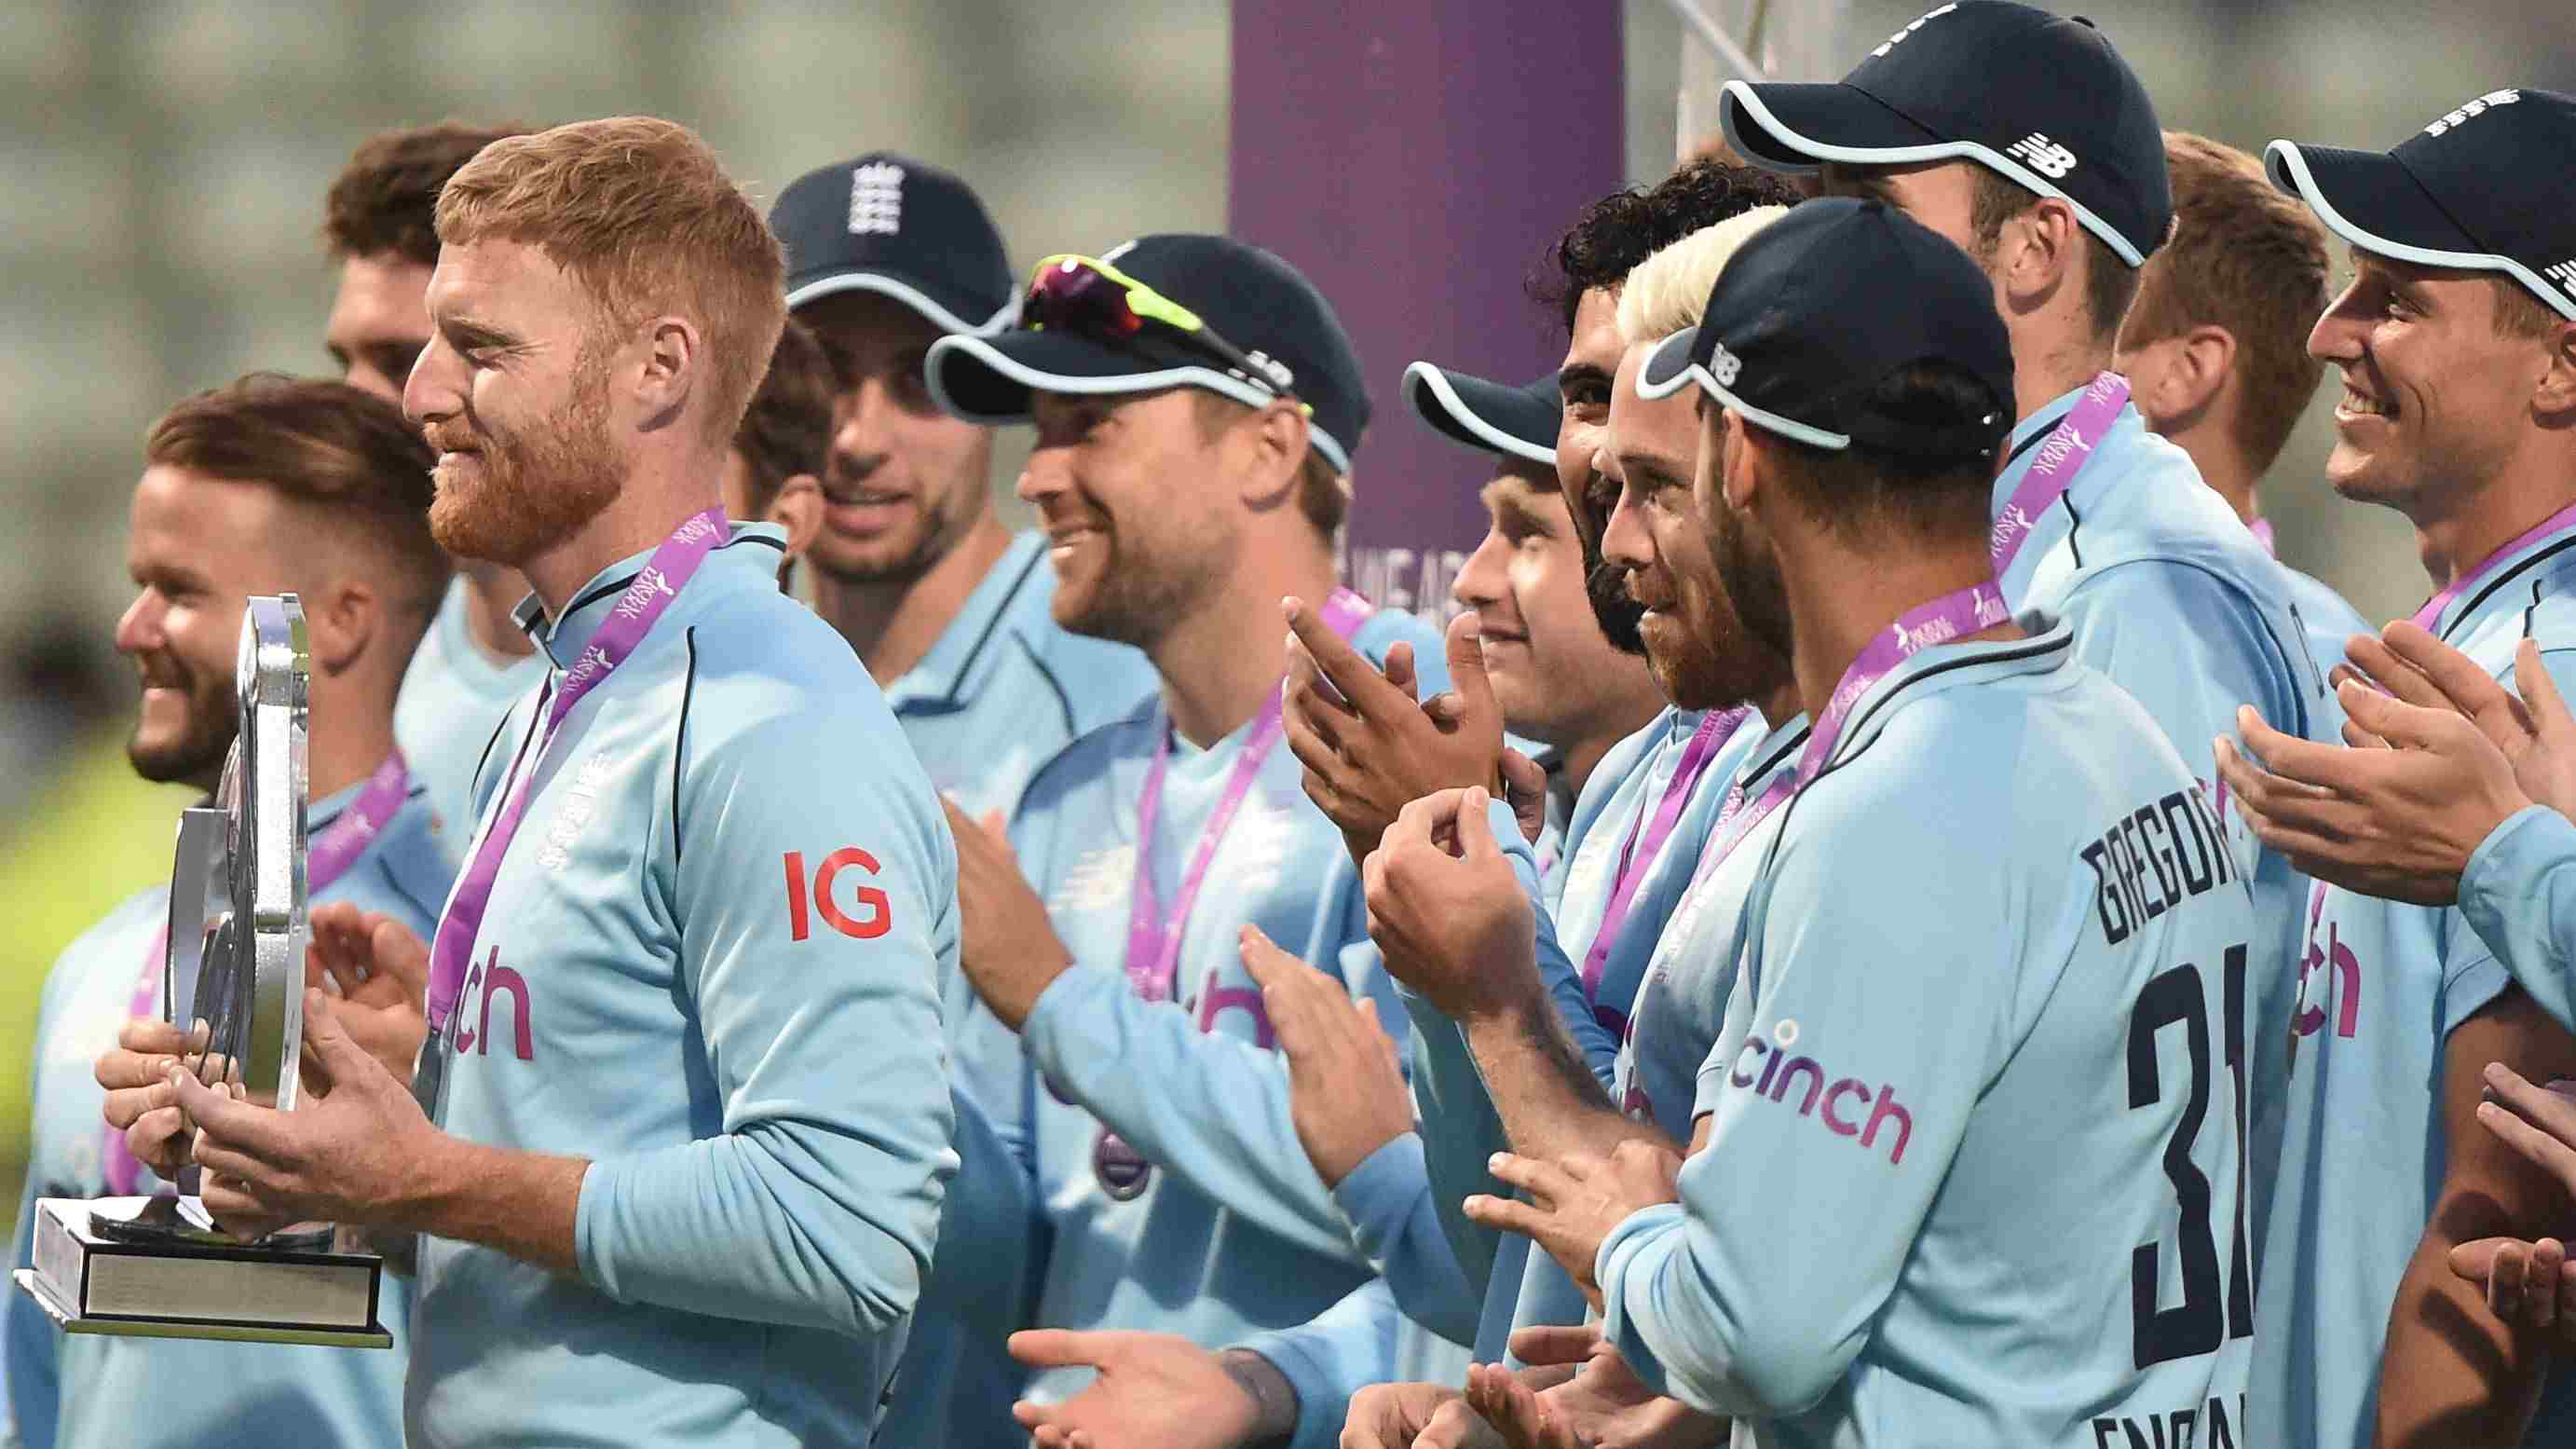 ENG vs PAK | 3rd ODI: Incompetent Pakistan get whitewashed by England's makeshift squad